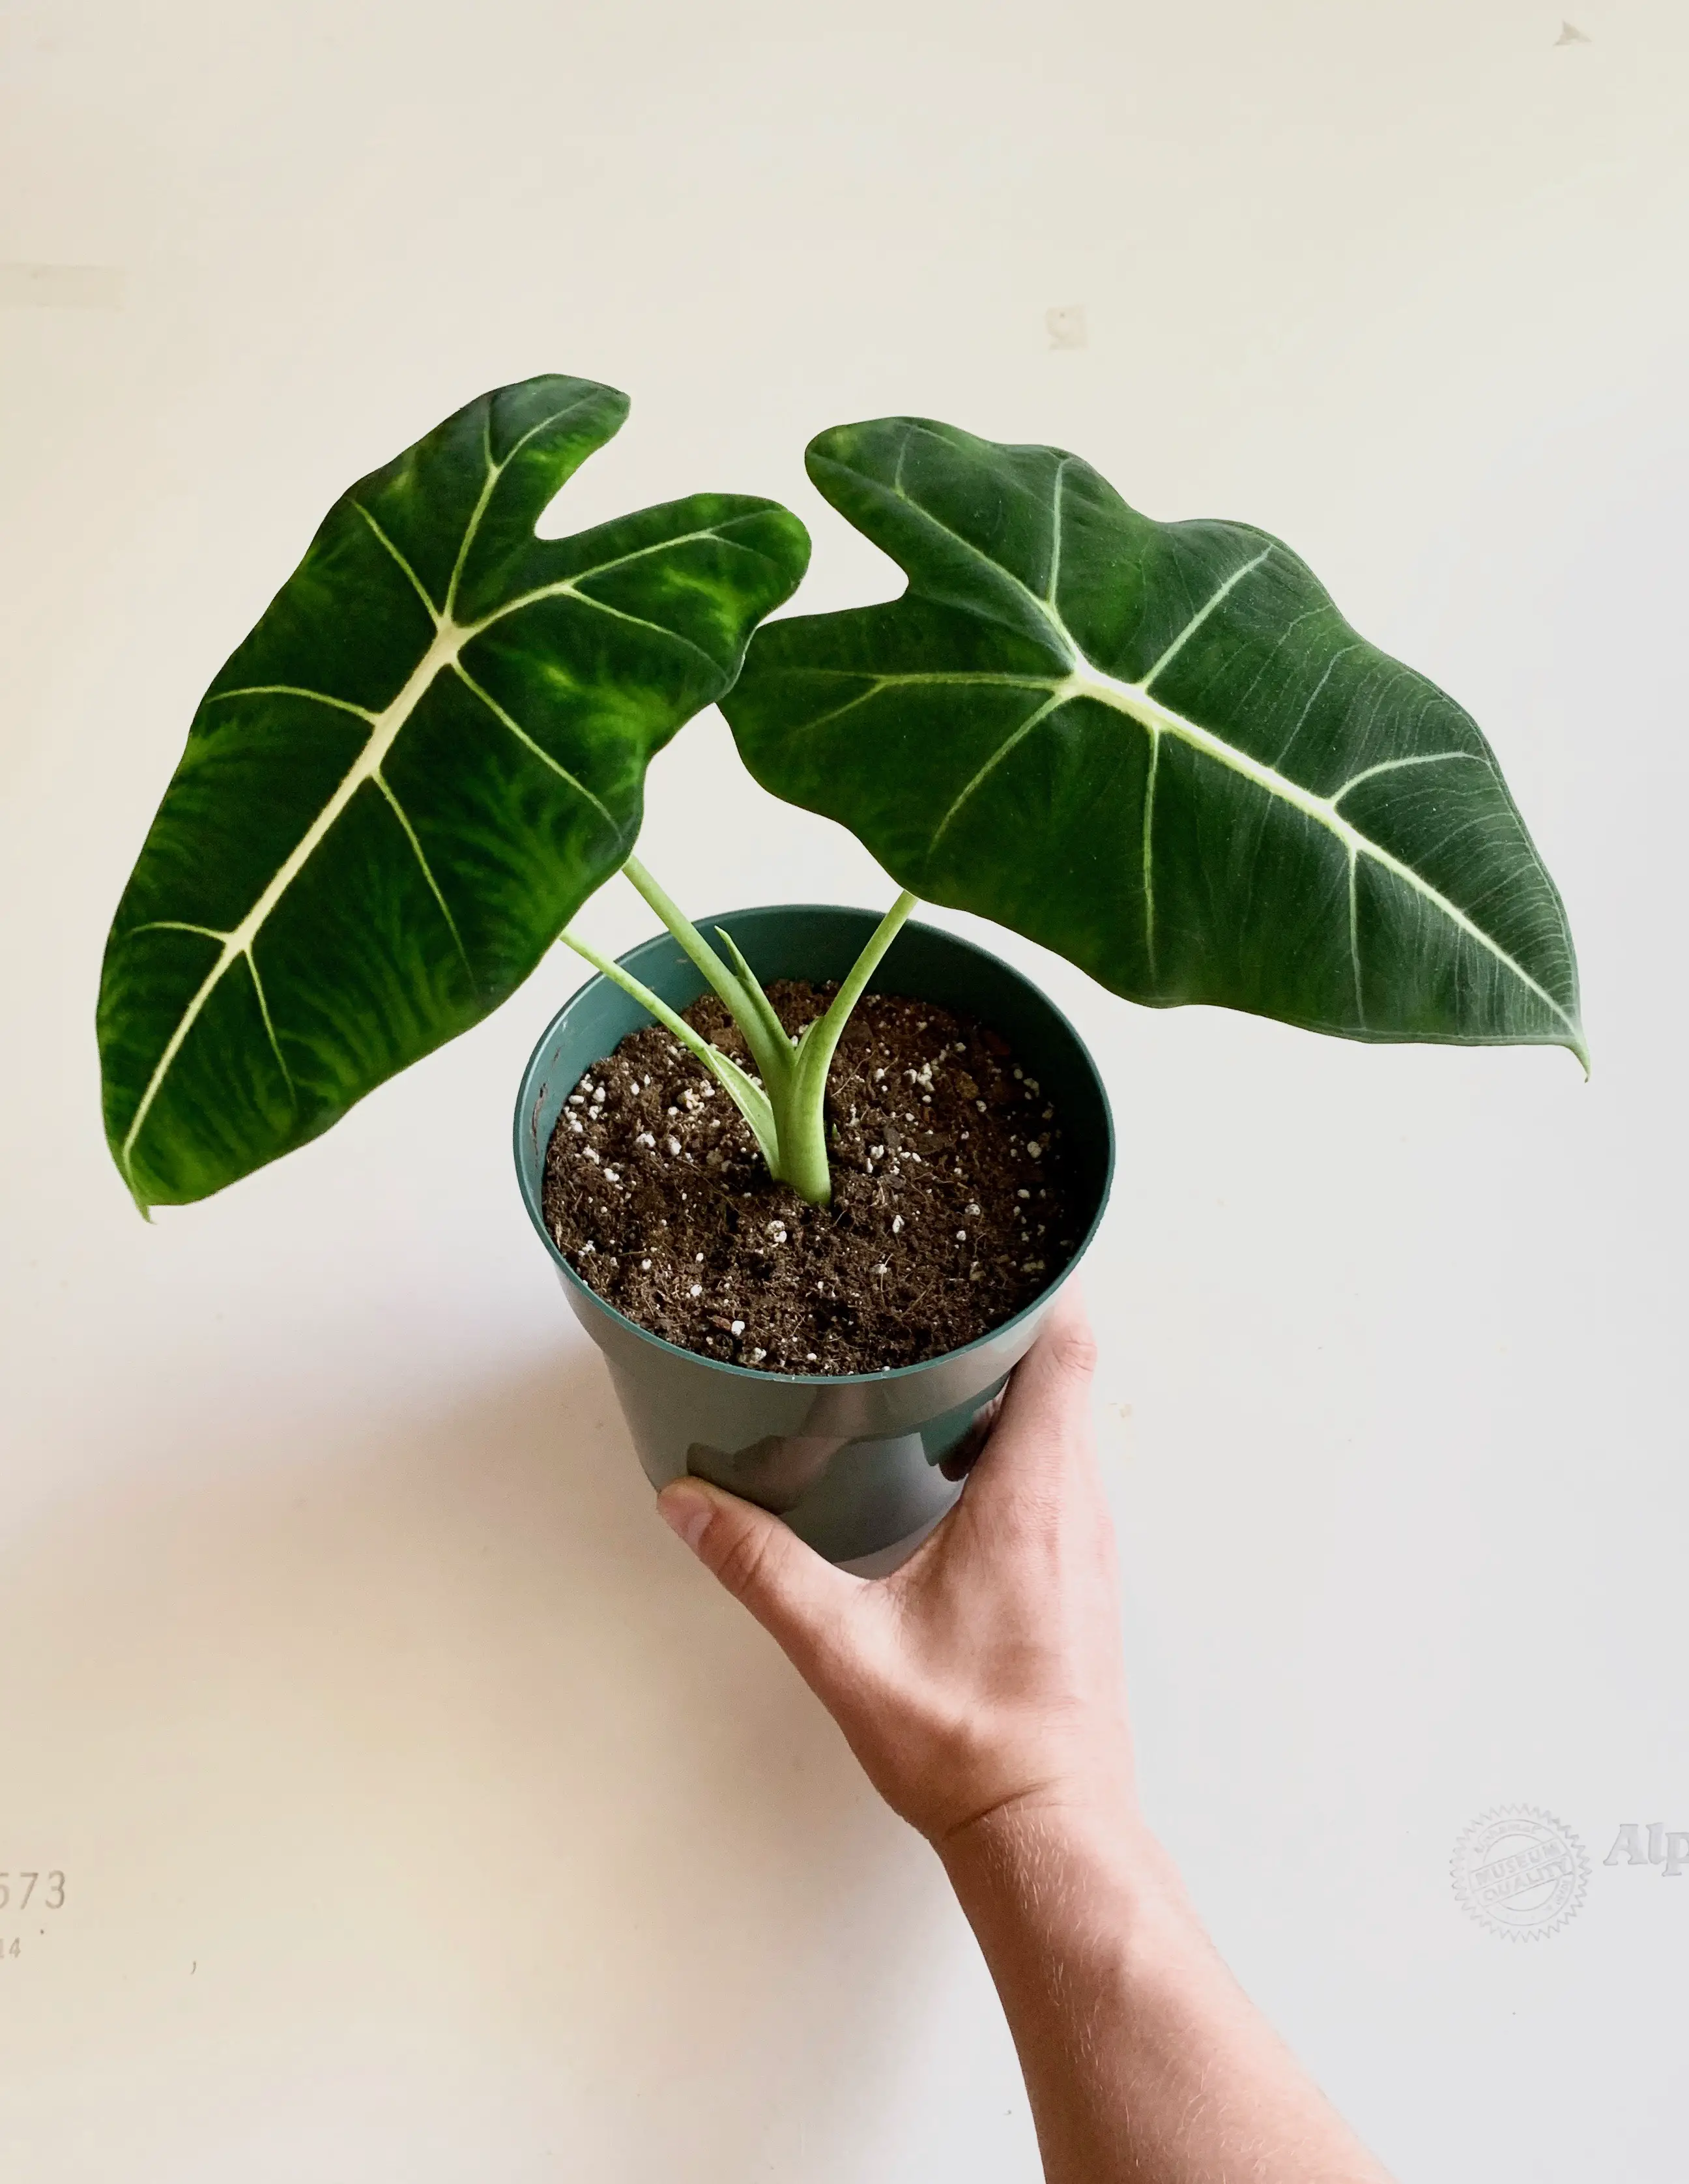 alocasia frydek plant with large green leaves